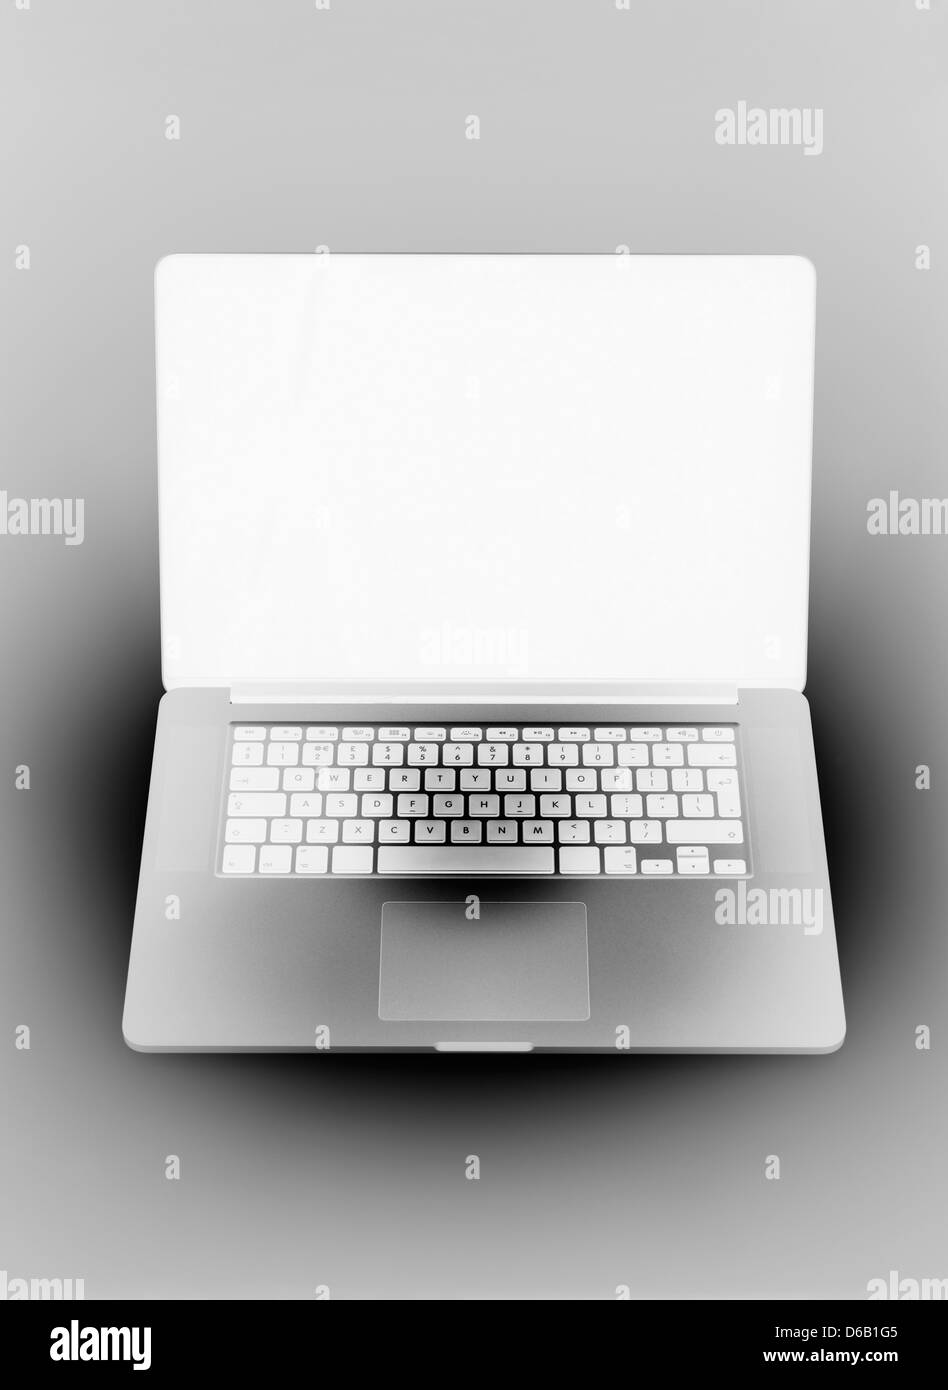 Inverted image of laptop computer Stock Photo